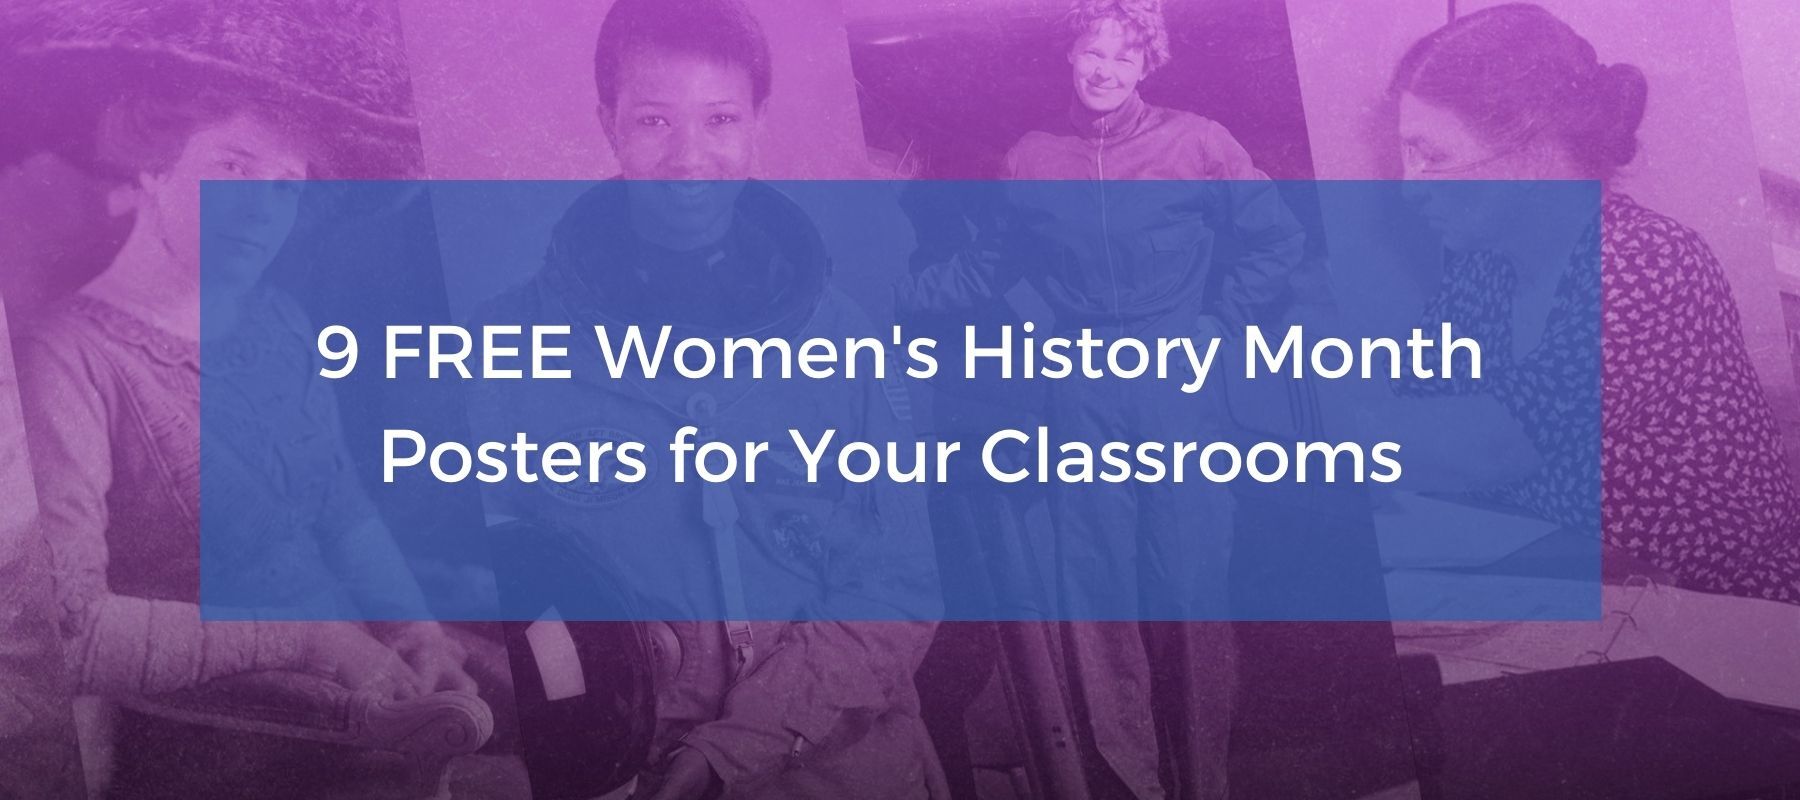 9 FREE women's history month potsers for your classrooms